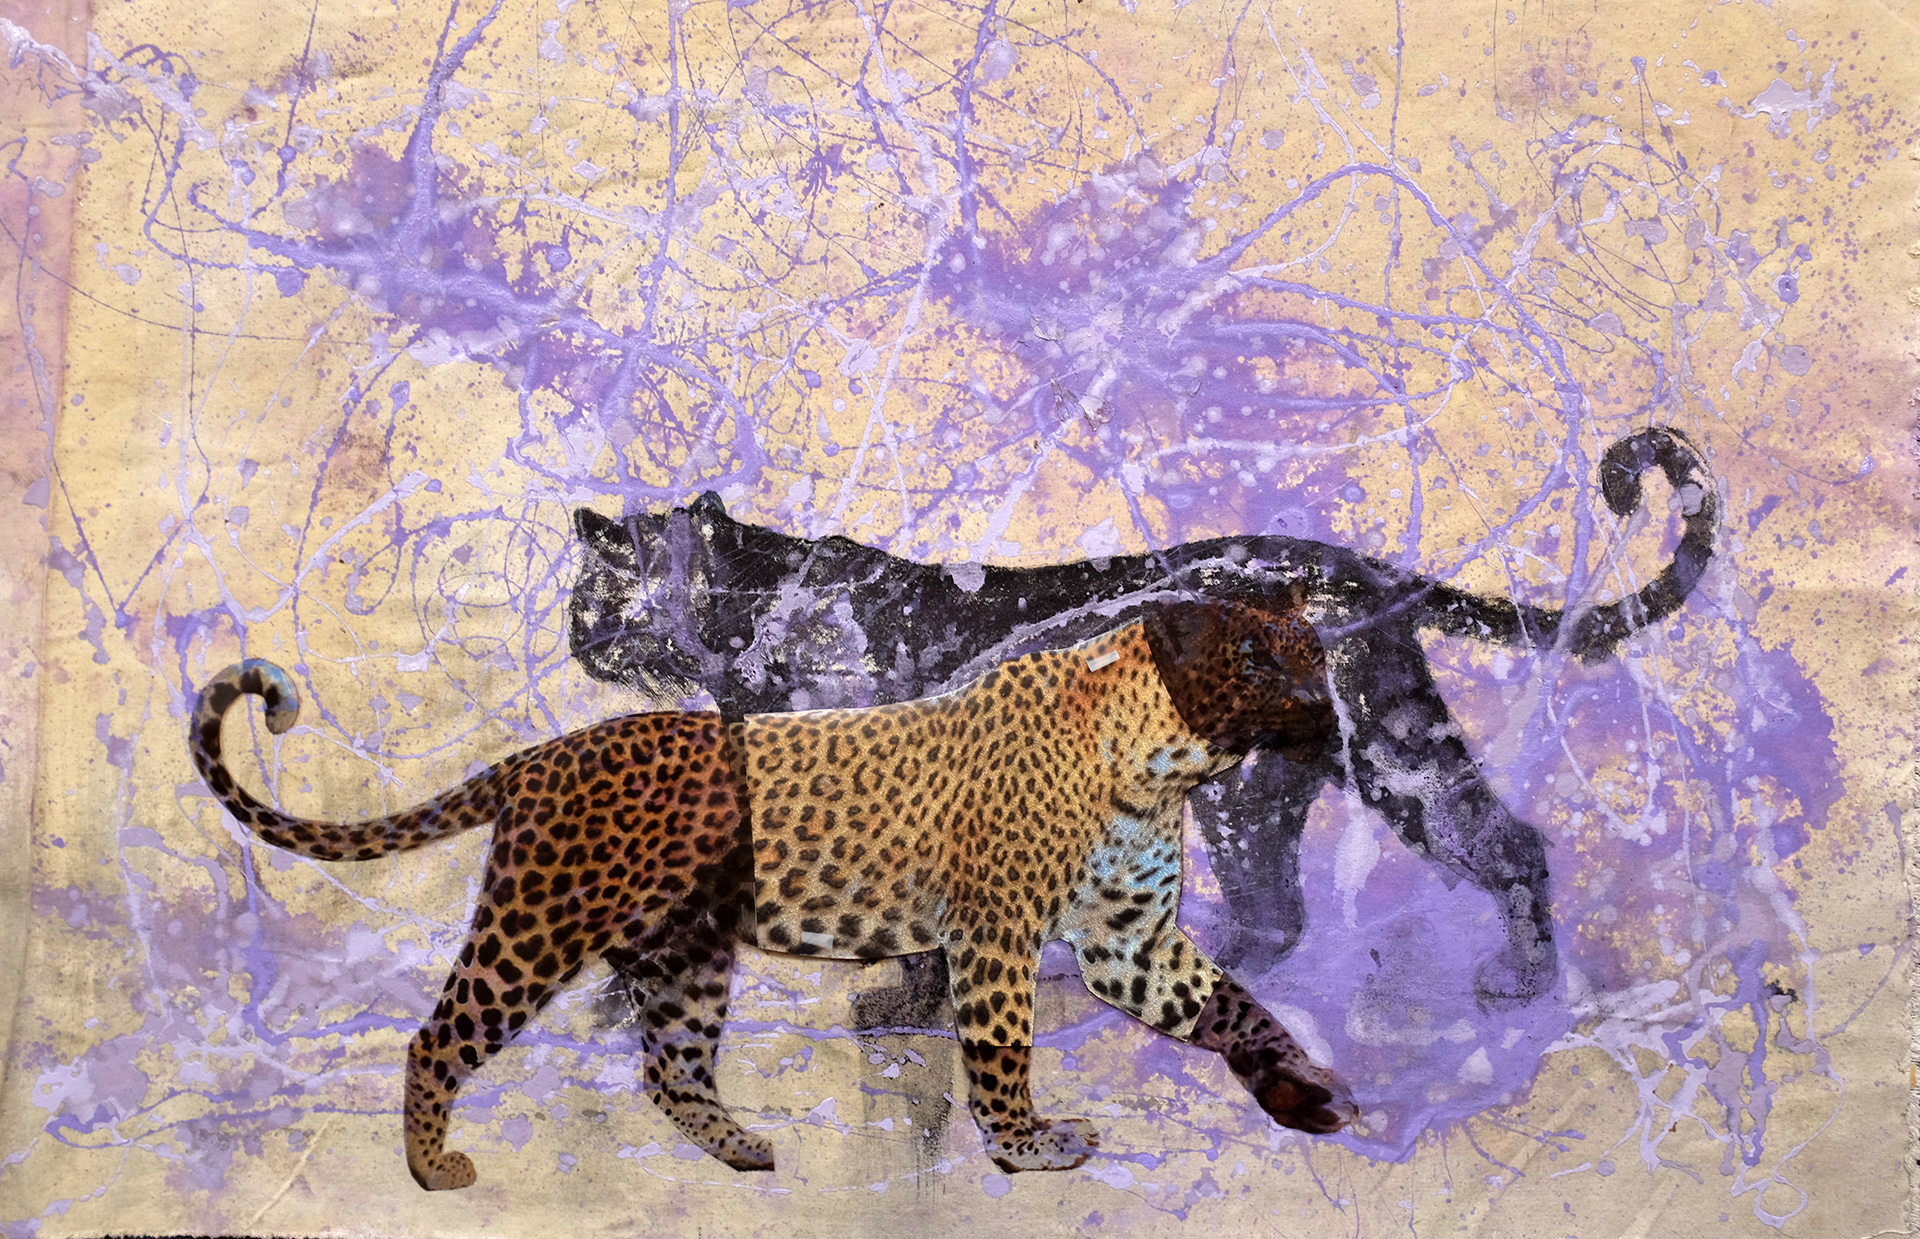 Leopards passing in a purple spatter milieu of time